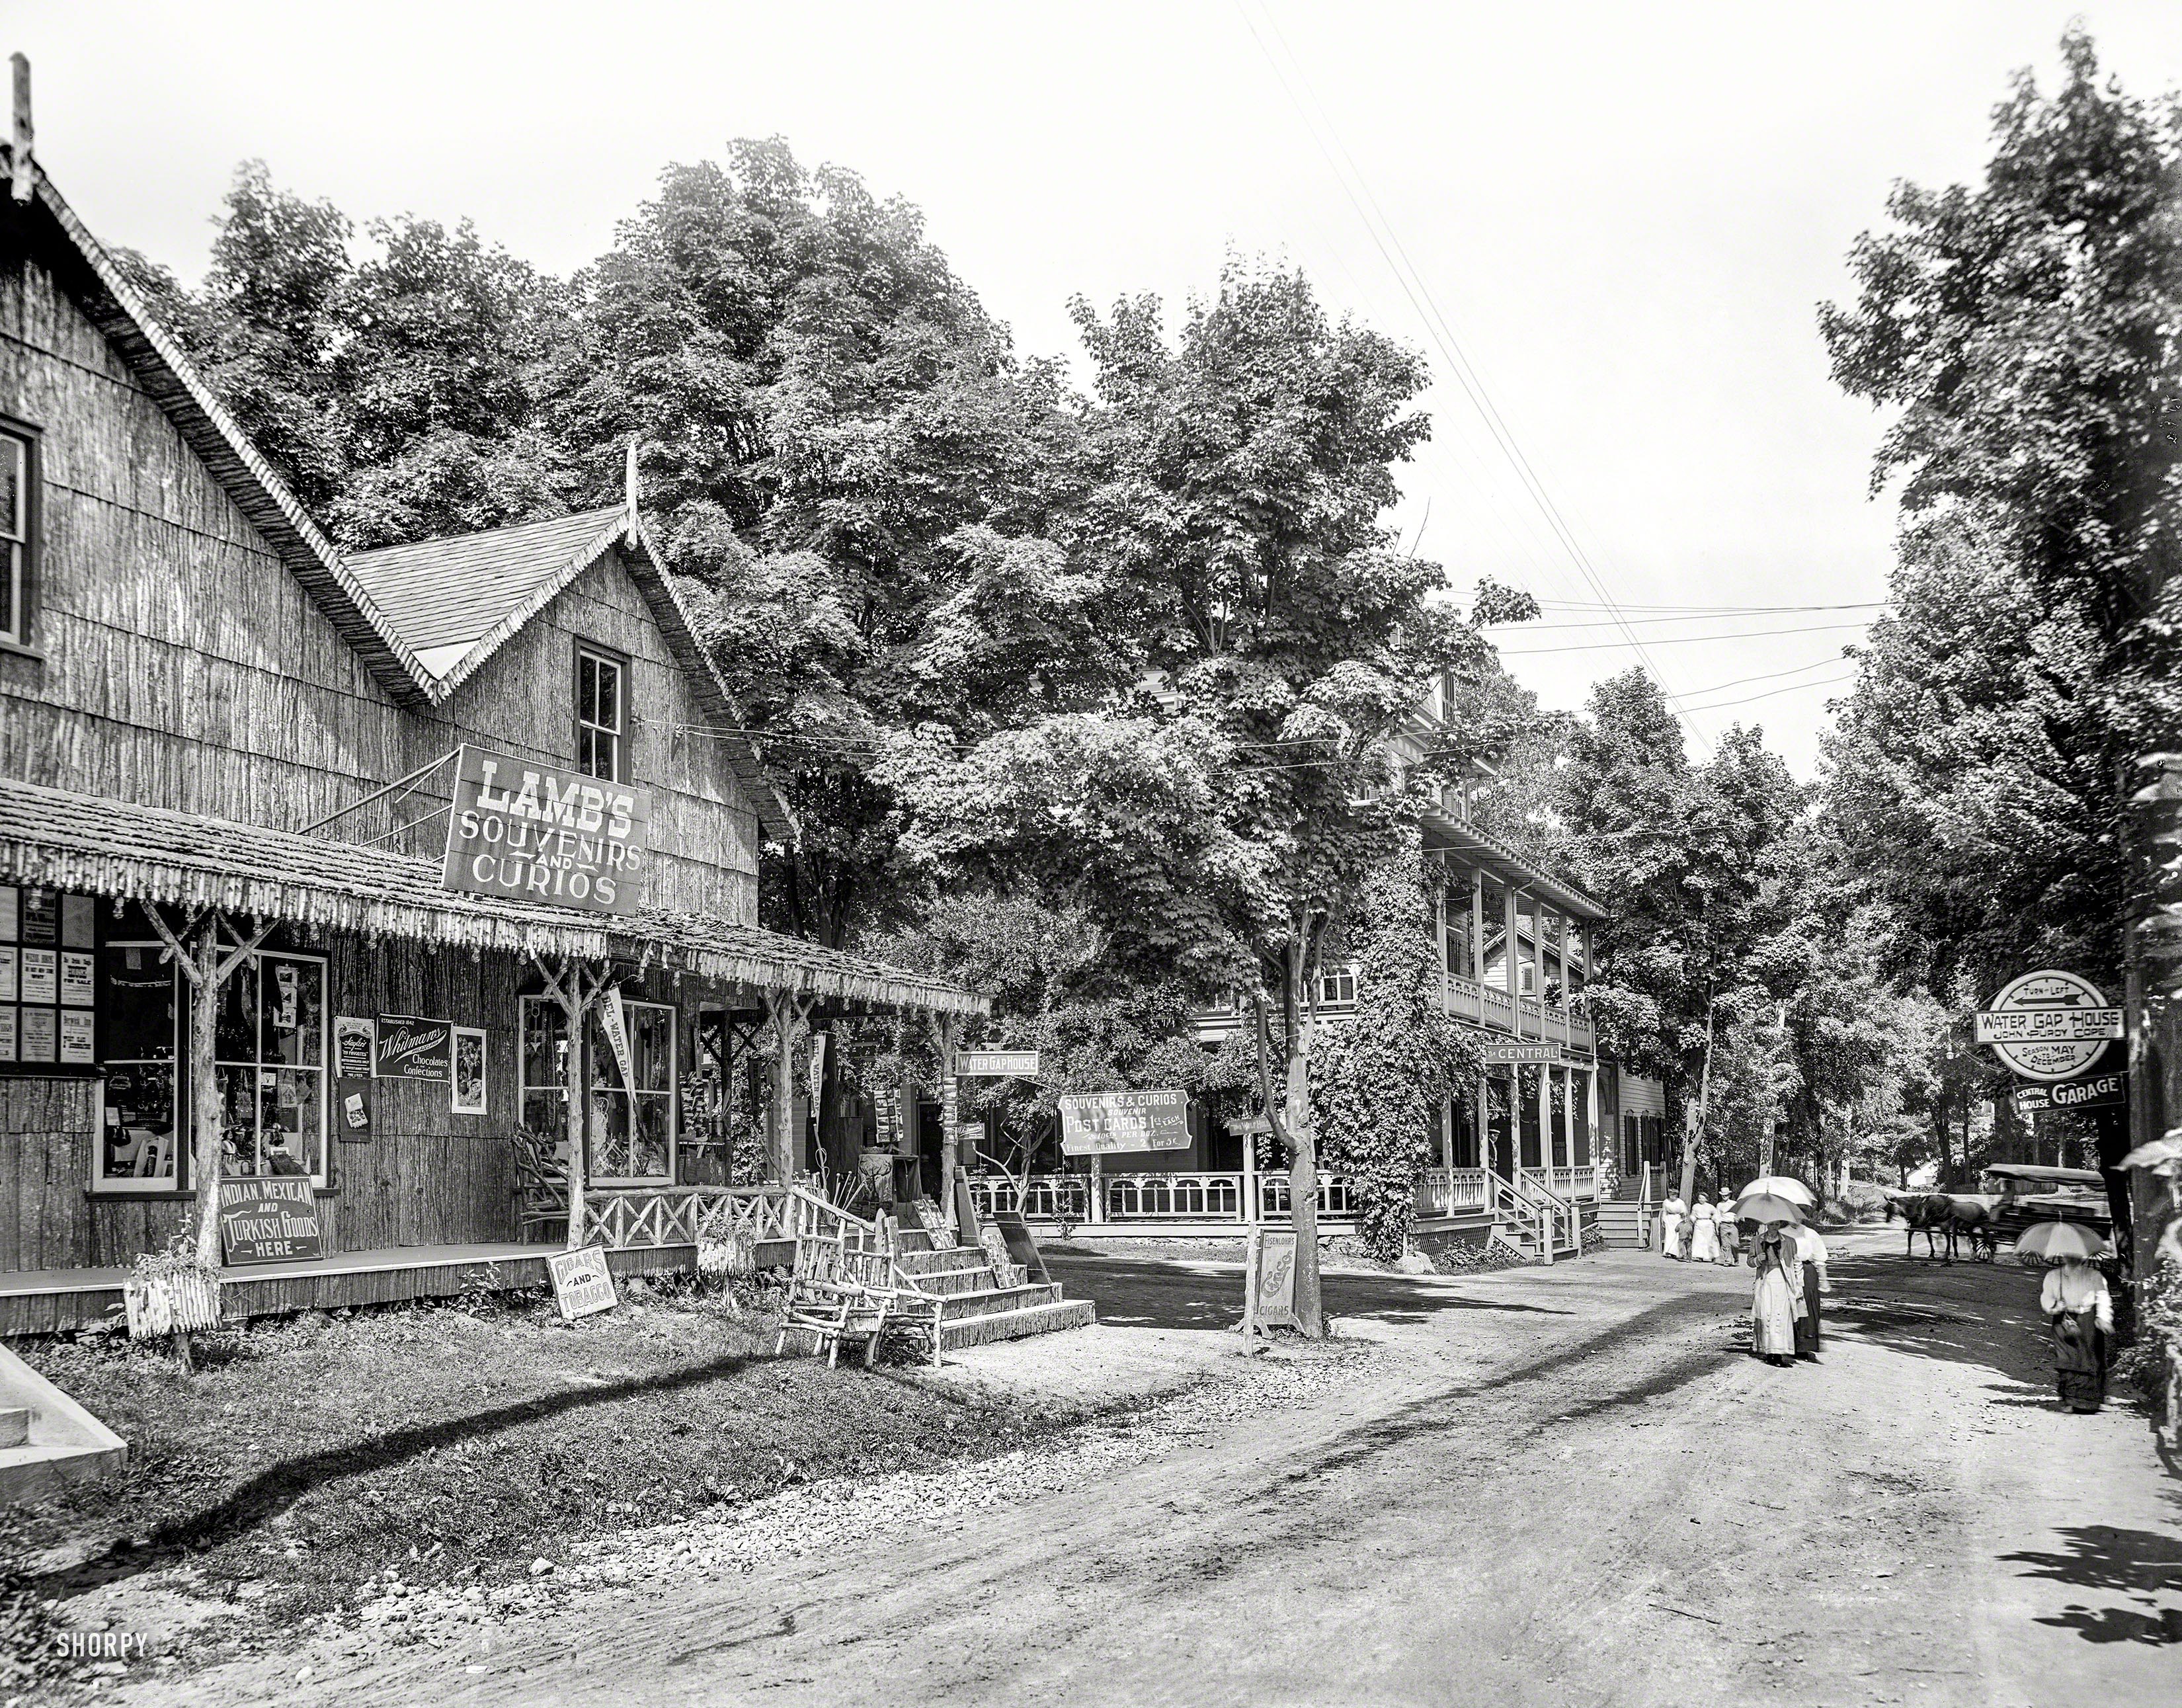 Circa 1905. "Street view, Delaware Water Gap, Pennsylvania." Where the archi&shy;tectural aesthetic seems to be Rustic Twig. 8x10 glass negative. View full size.